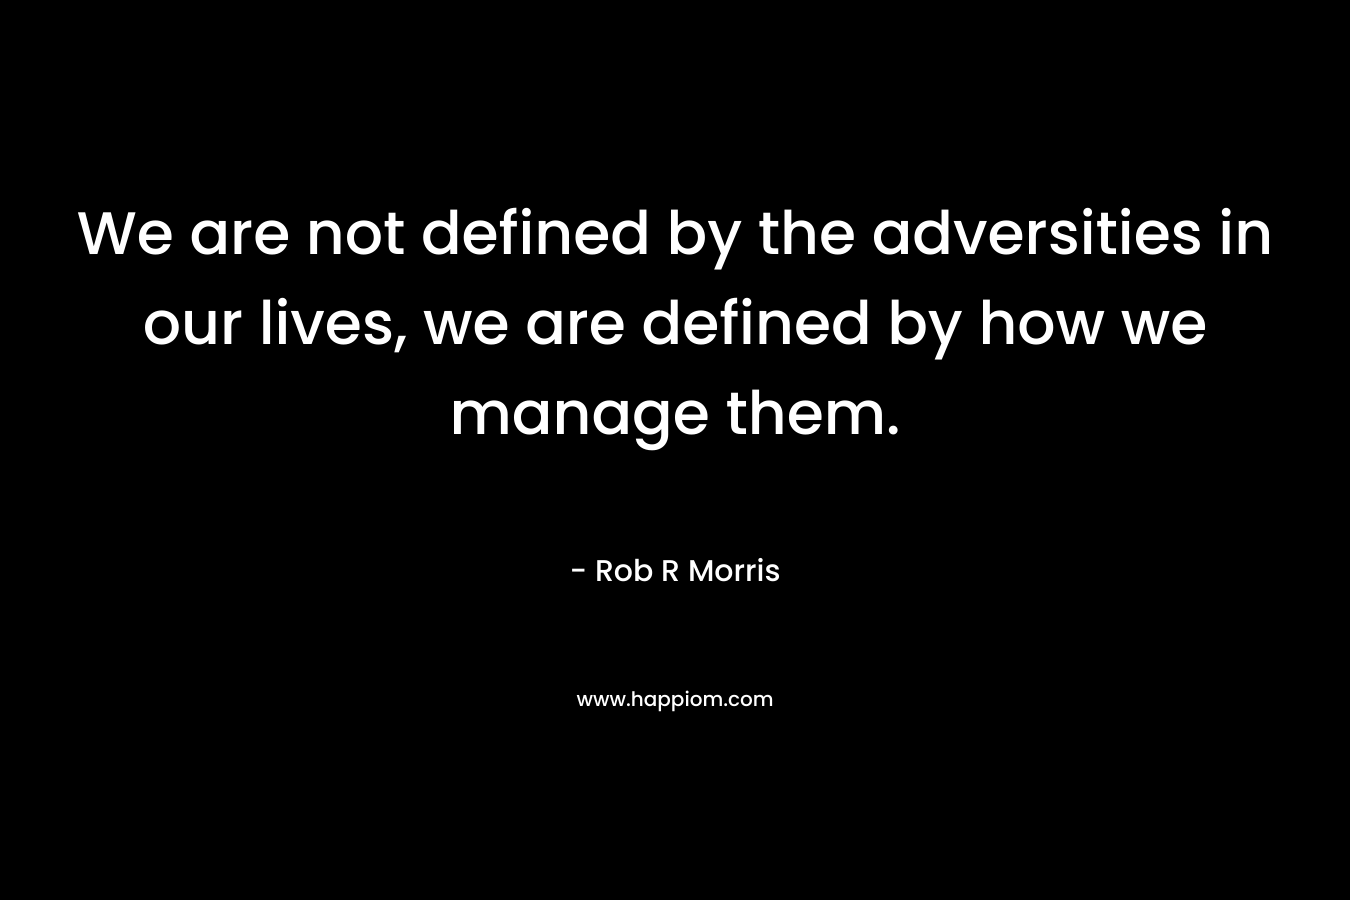 We are not defined by the adversities in our lives, we are defined by how we manage them.